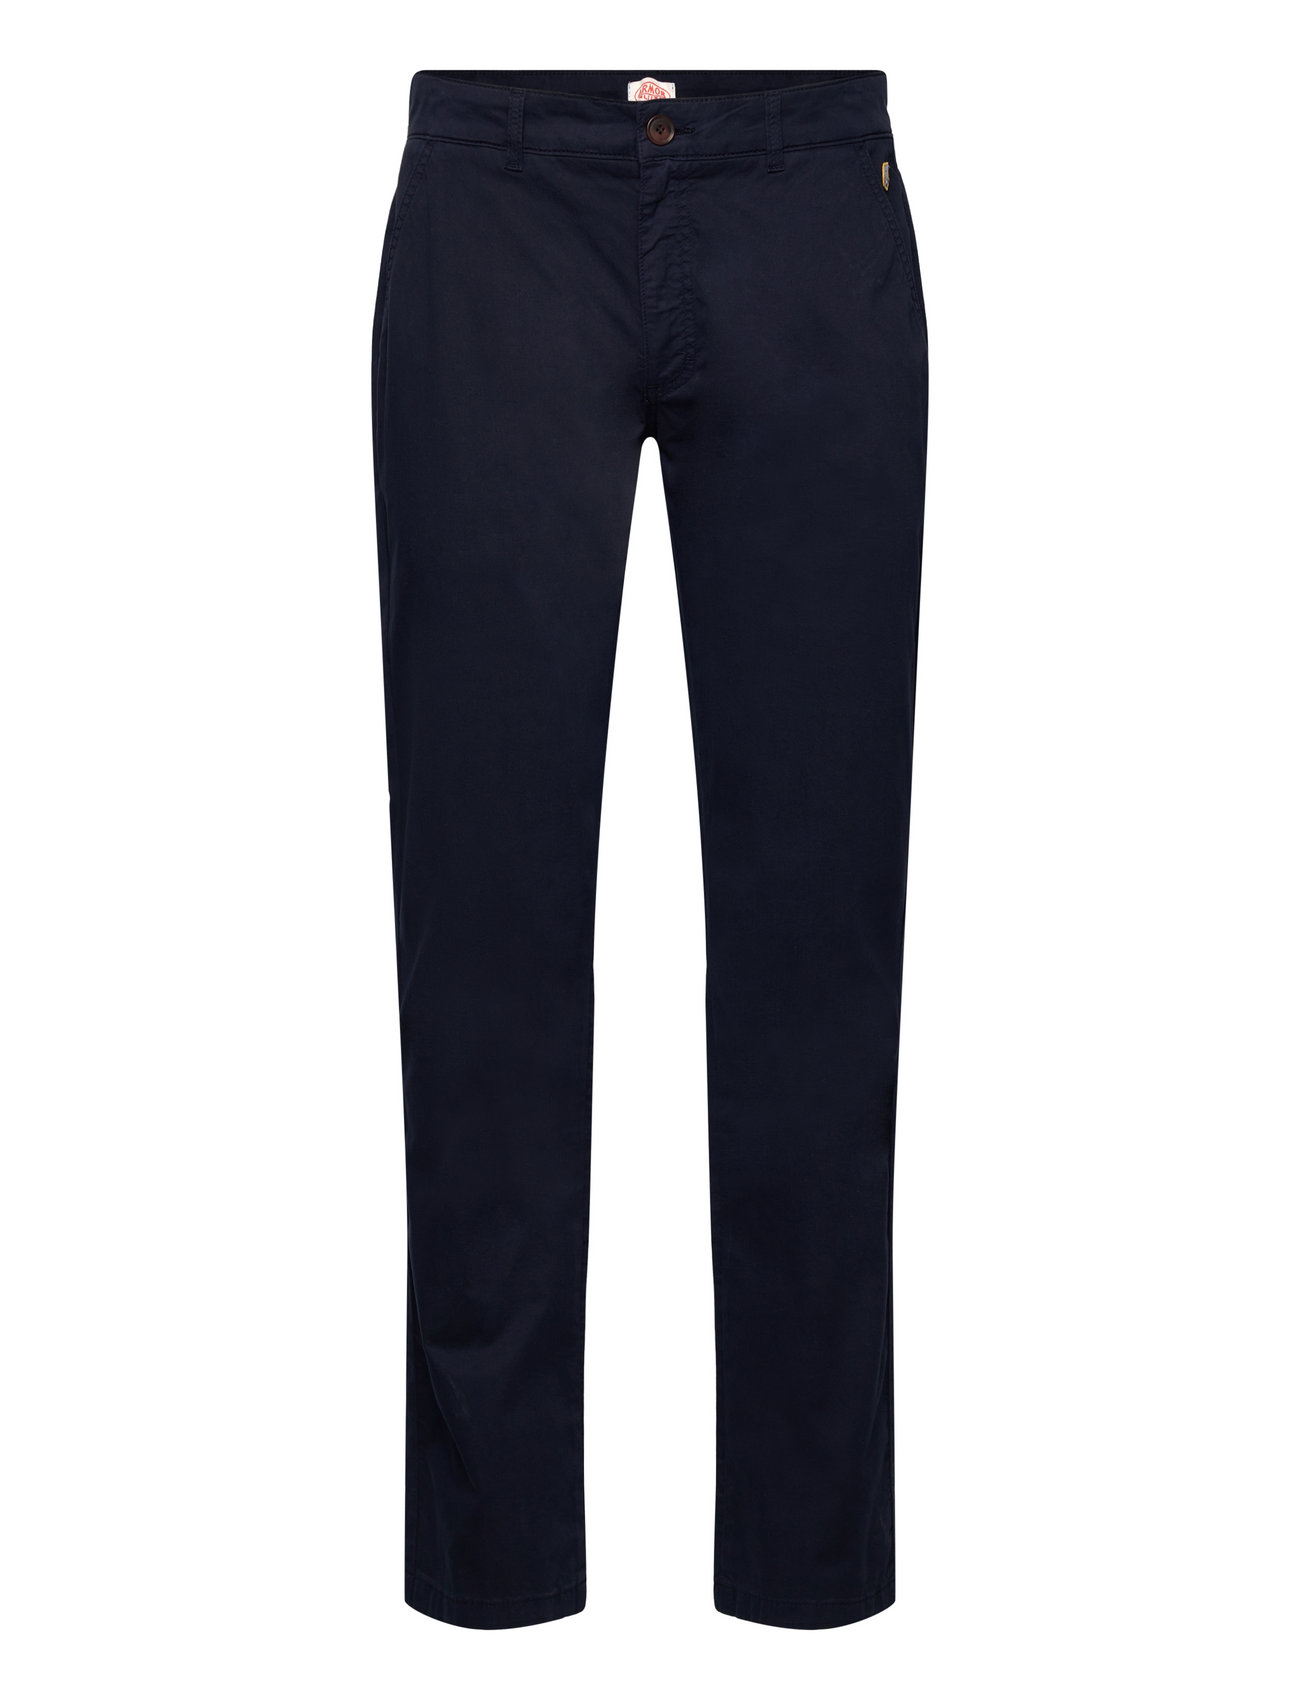 Chinos Trousers Heritage Byxor Marinblå Armor Lux